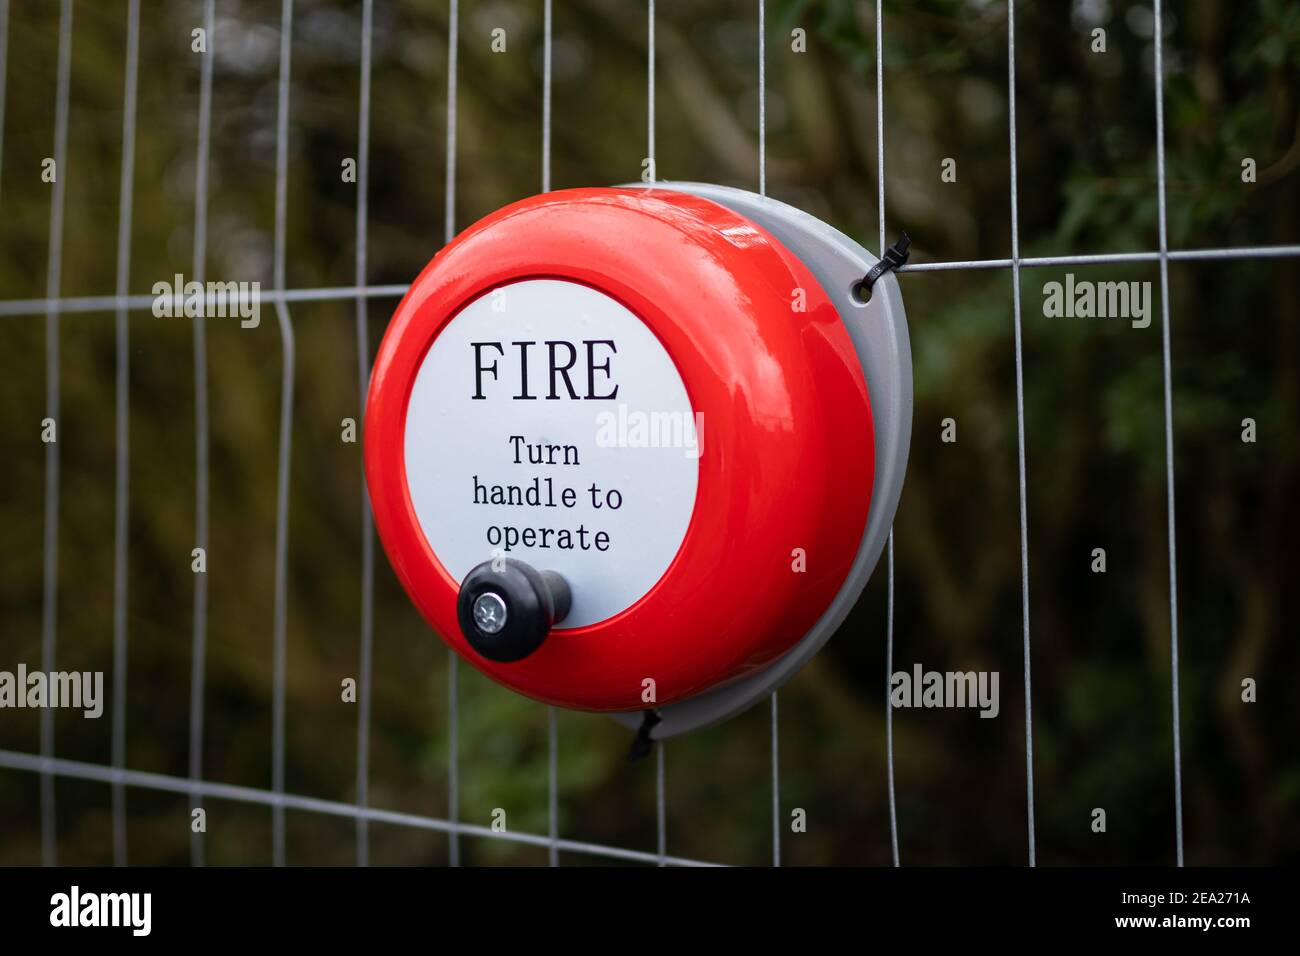 Bright red metal fire alarm bell turn handle to operate alert manual steel ringing on construction building site attached to metal fence Stock Photo